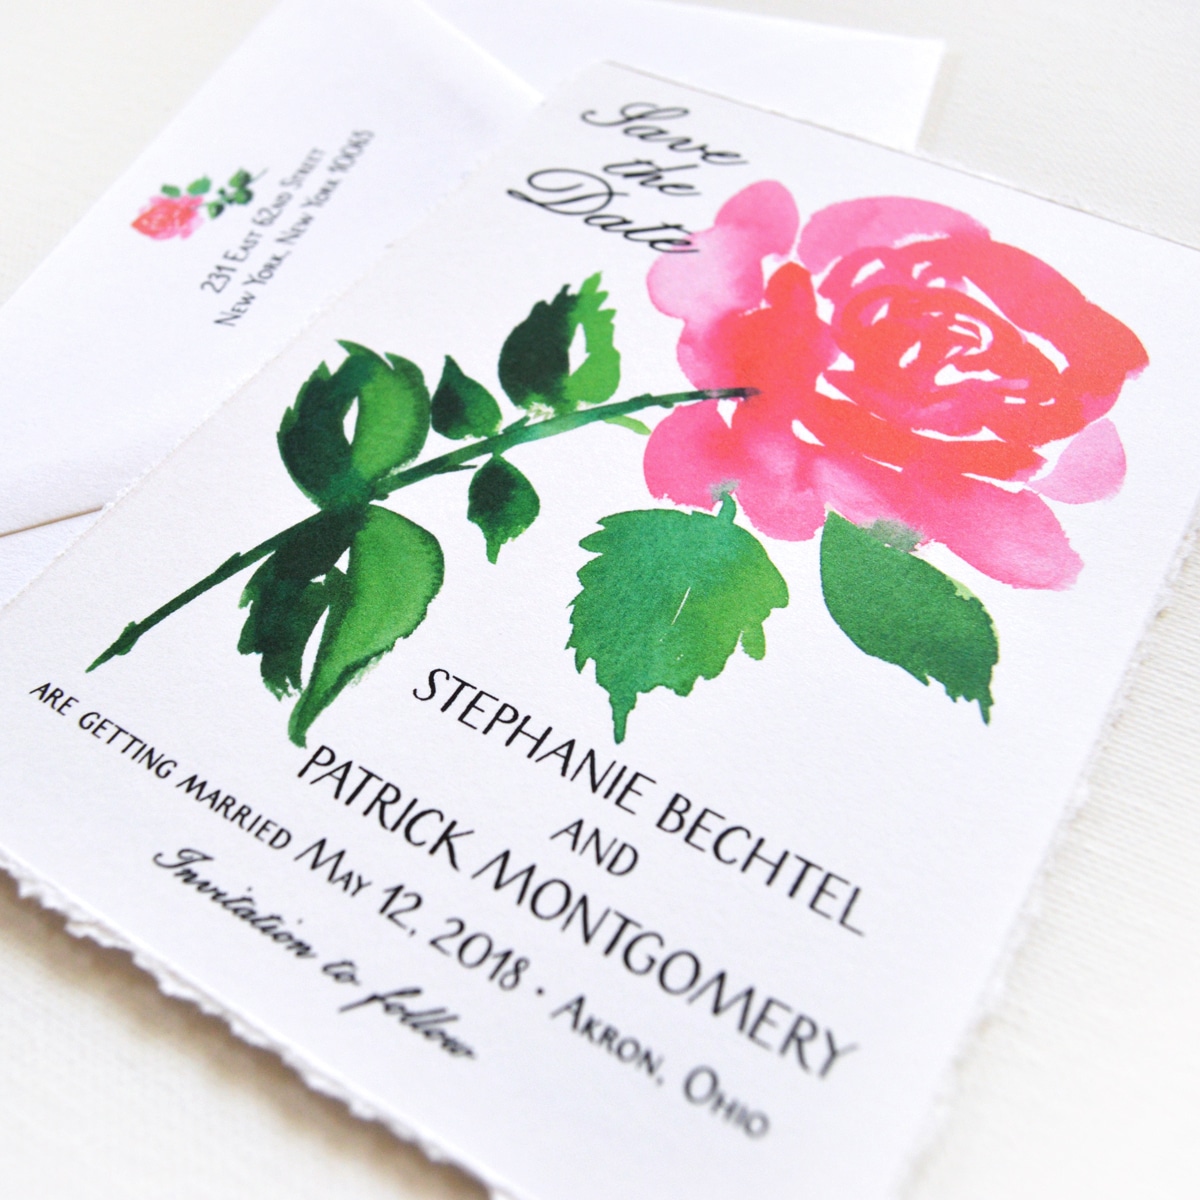 Custom save the dates with watercolor red rose by artist Michelle Mospens. www.mospensstudio.com